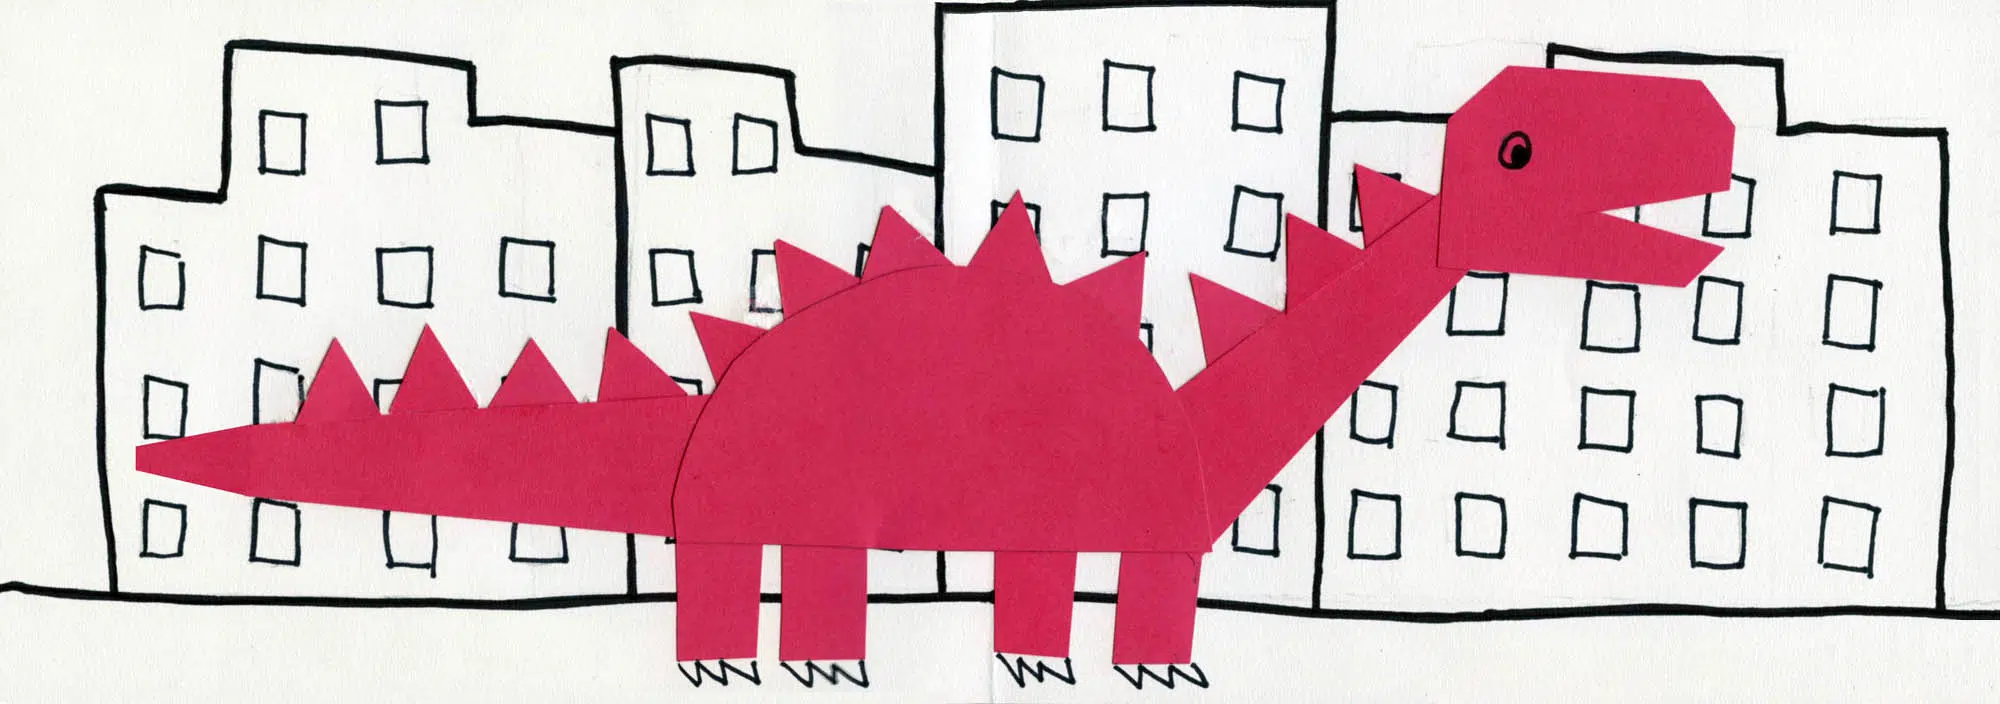 Easy Dinosaur Art Project Collage and Drawing